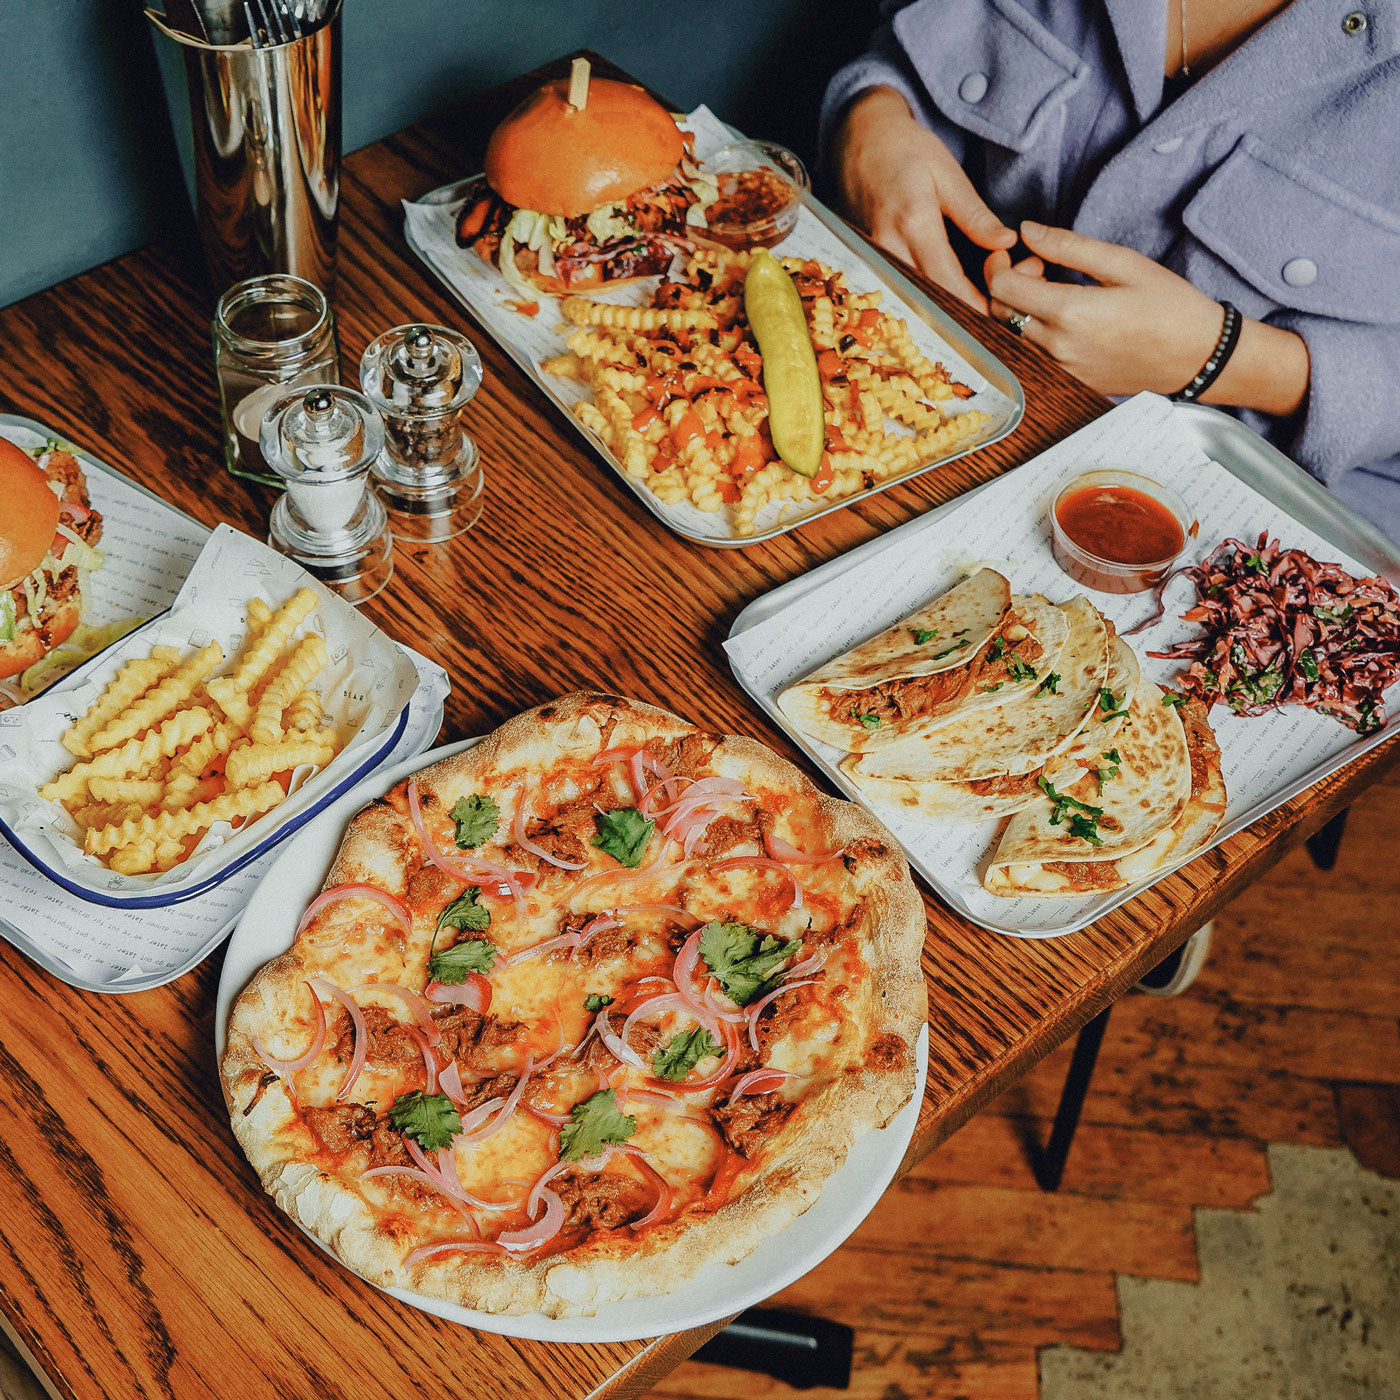 Burgers, tacos and pizza from the Later at BEAR menu